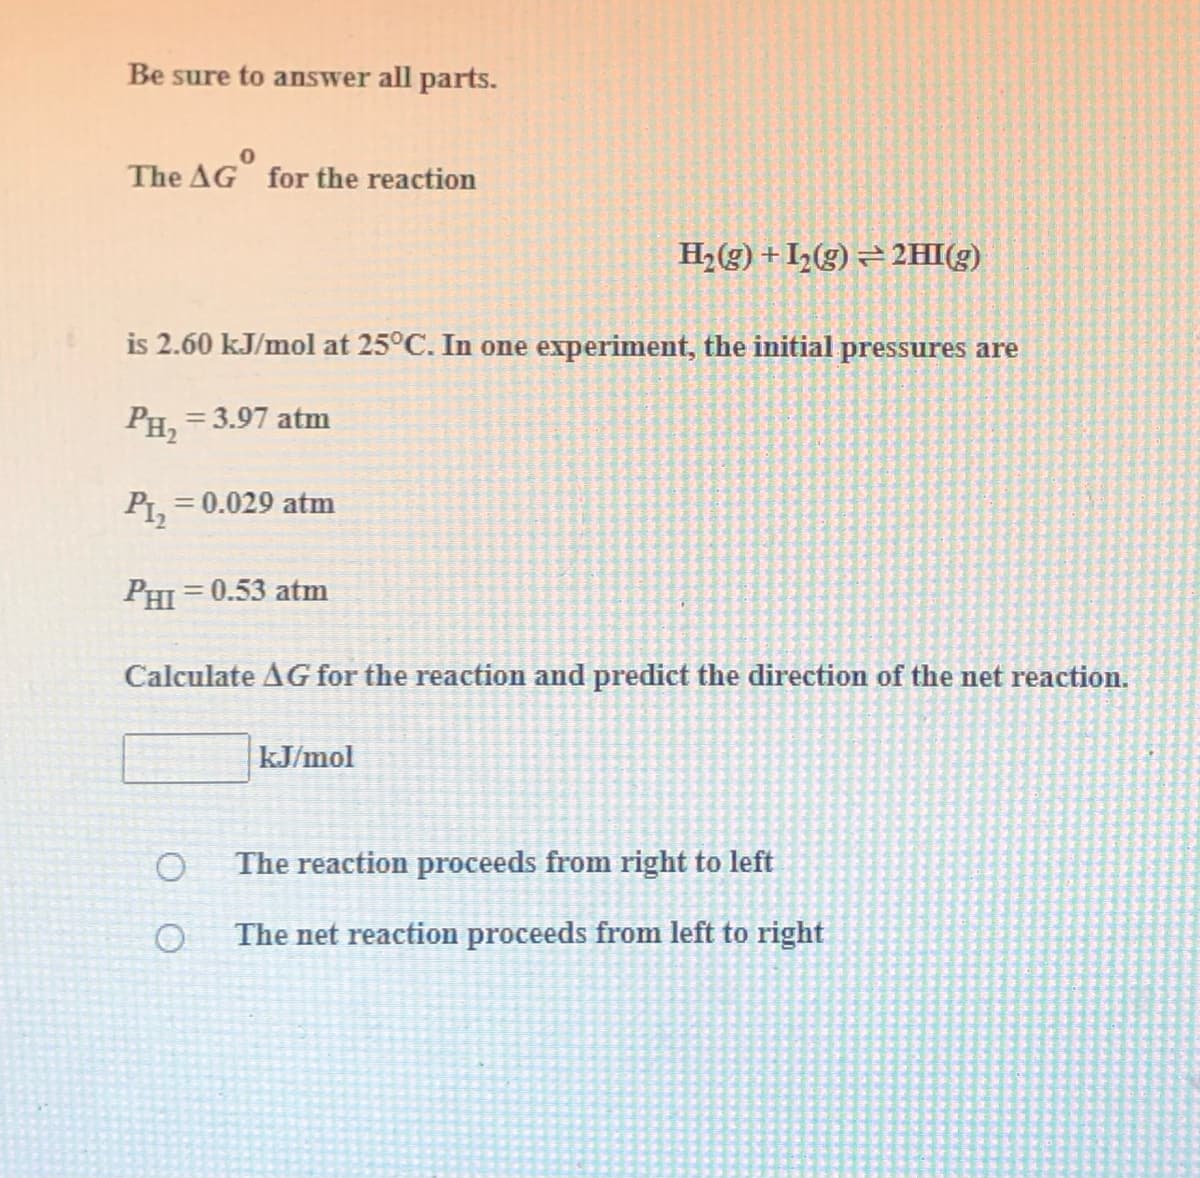 Be sure to answer all parts.
The AG for the reaction
H2(g) + I,(g) = 2HI(g)
is 2.60 kJ/mol at 25°C. In one experiment, the initial pressures are
PH2
= 3.97 atm
= 0.029 atm
PHI = 0.53 atm
Calculate AG for the reaction and predict the direction of the net reaction.
kJ/mol
The reaction proceeds from right to left
The net reaction proceeds from left to right
